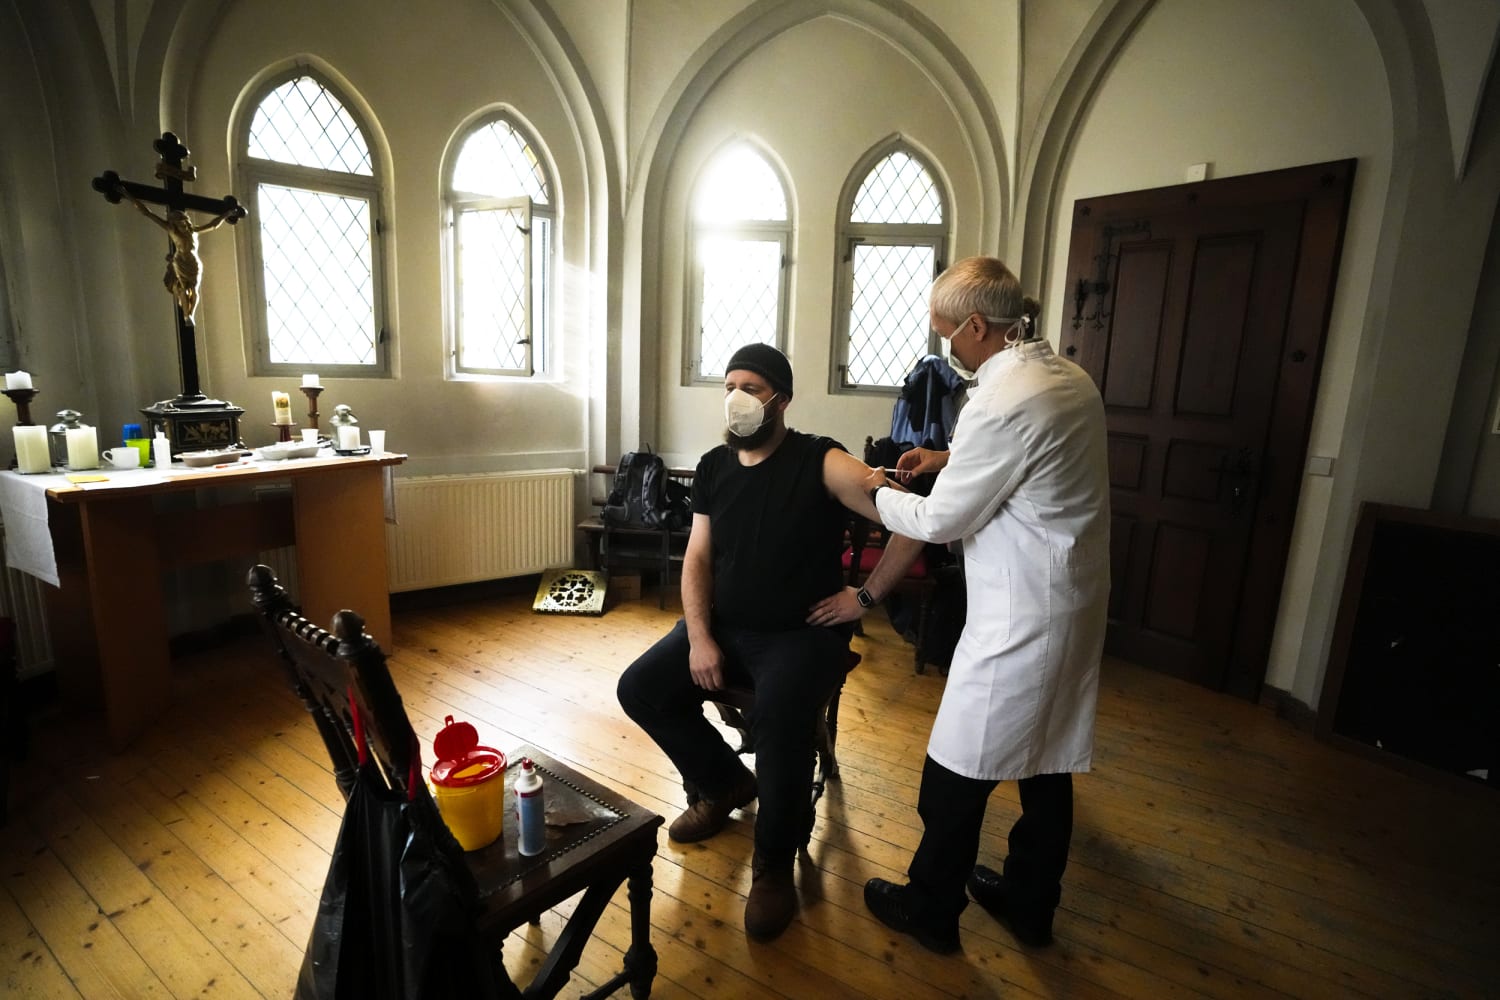 German pastors push for shots in region known for vaccine resistance